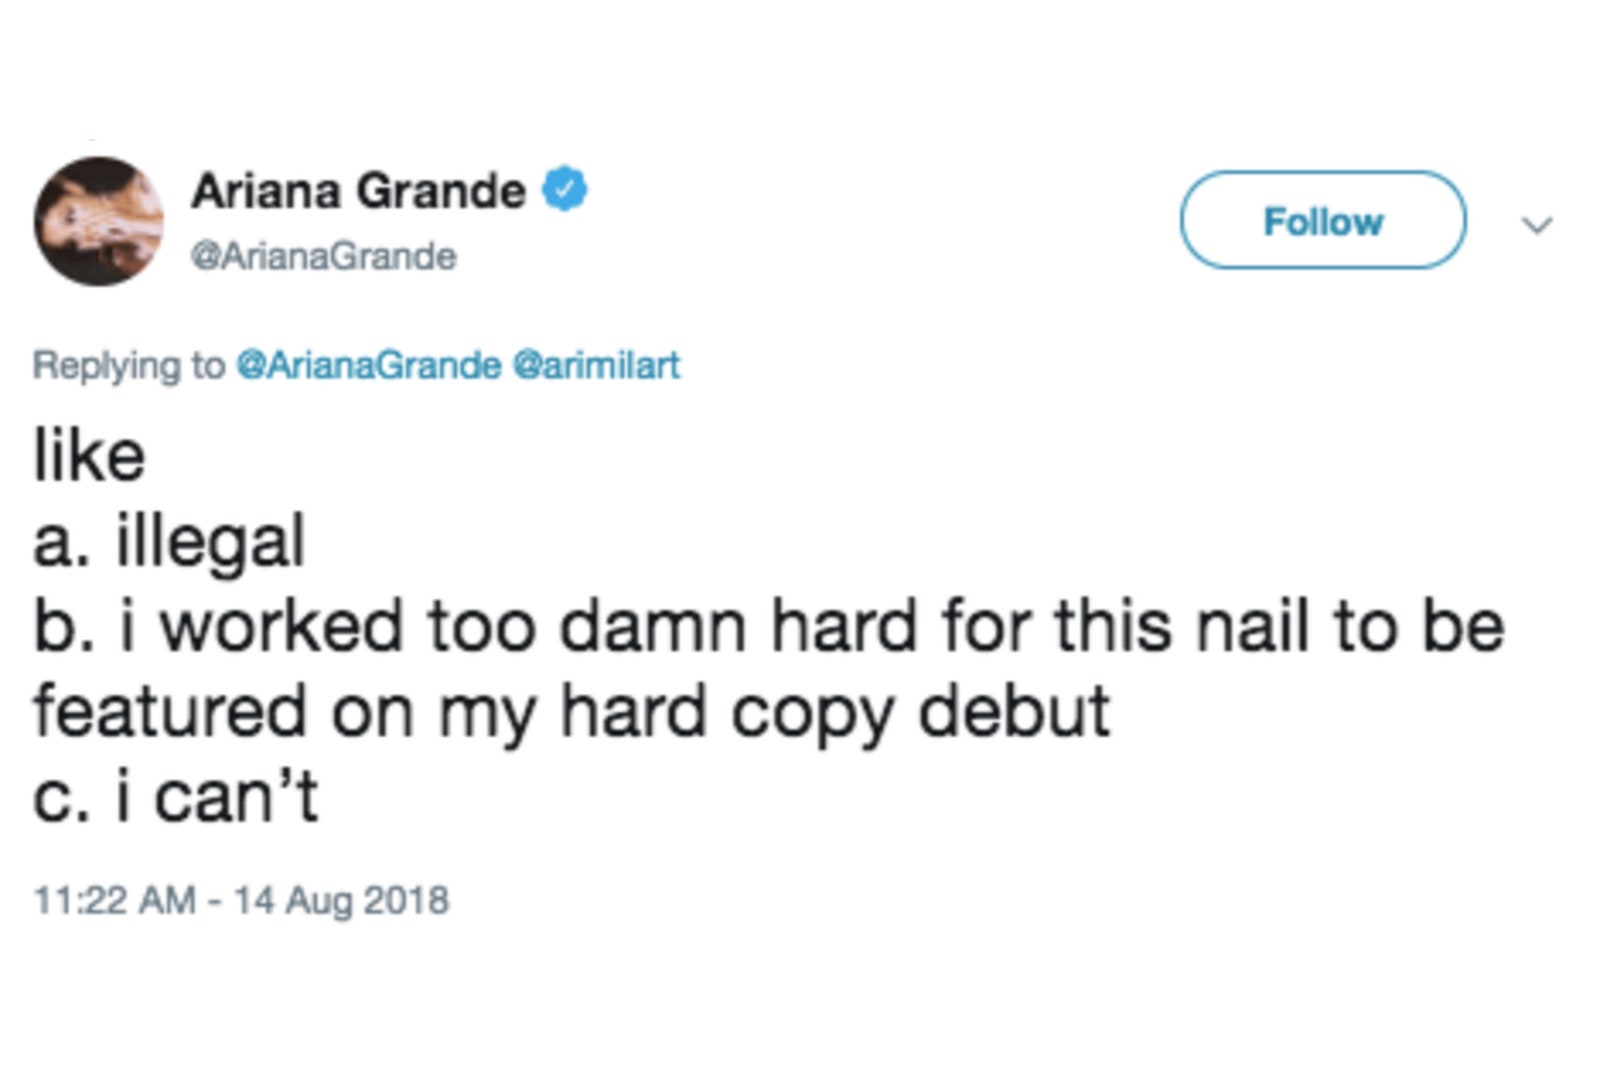 charlie winchester recommends ariana grande leaked photos pic